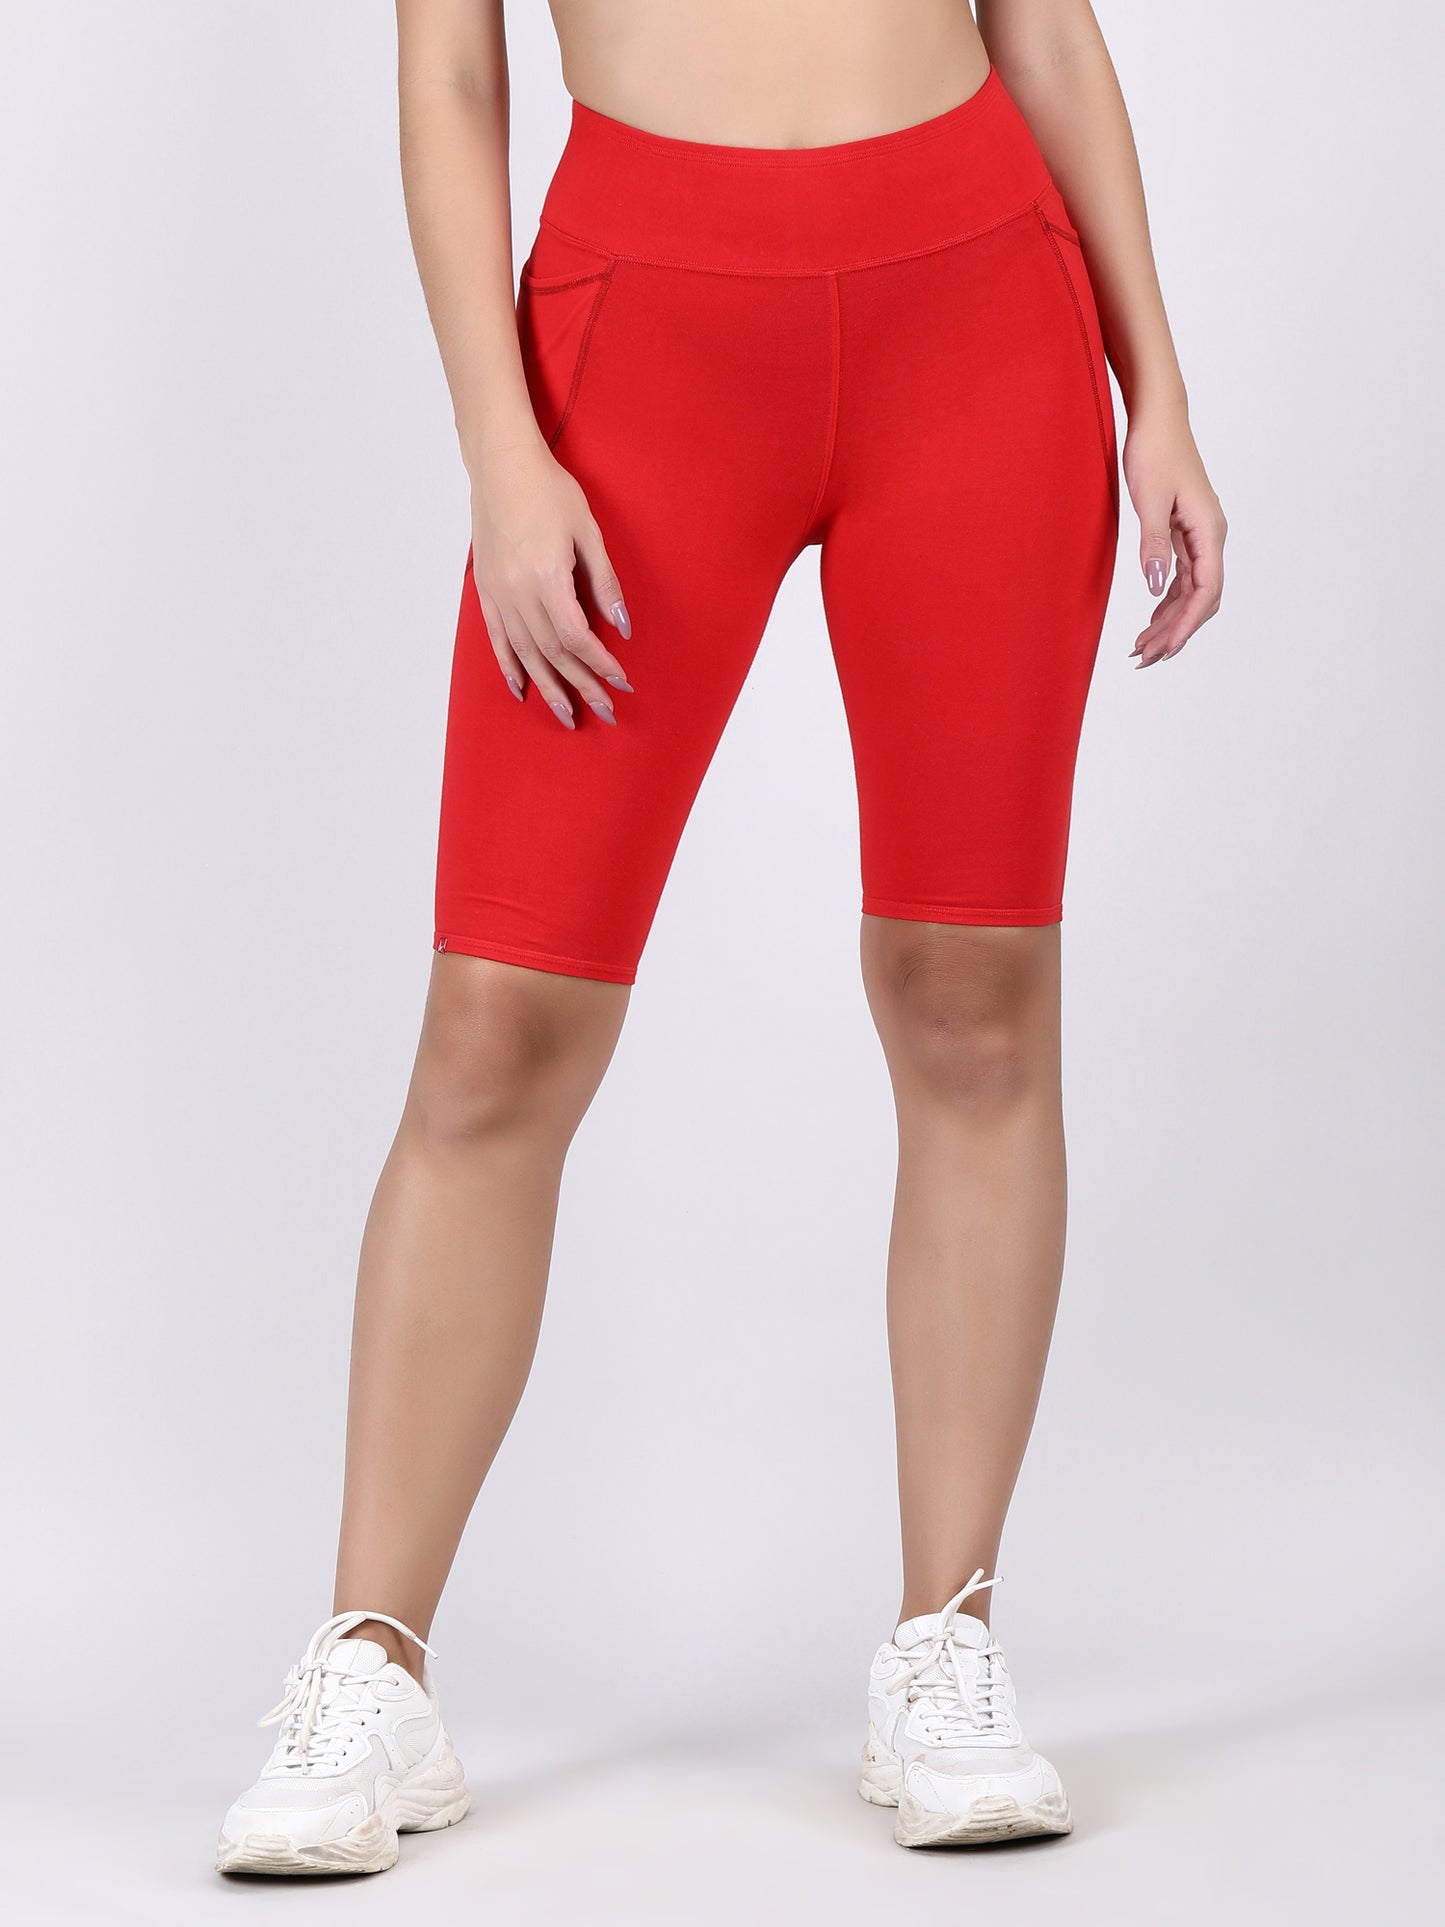 Adorna Shapparel Mid-Thigh Length Cycling Shorts for women - Bloody Red